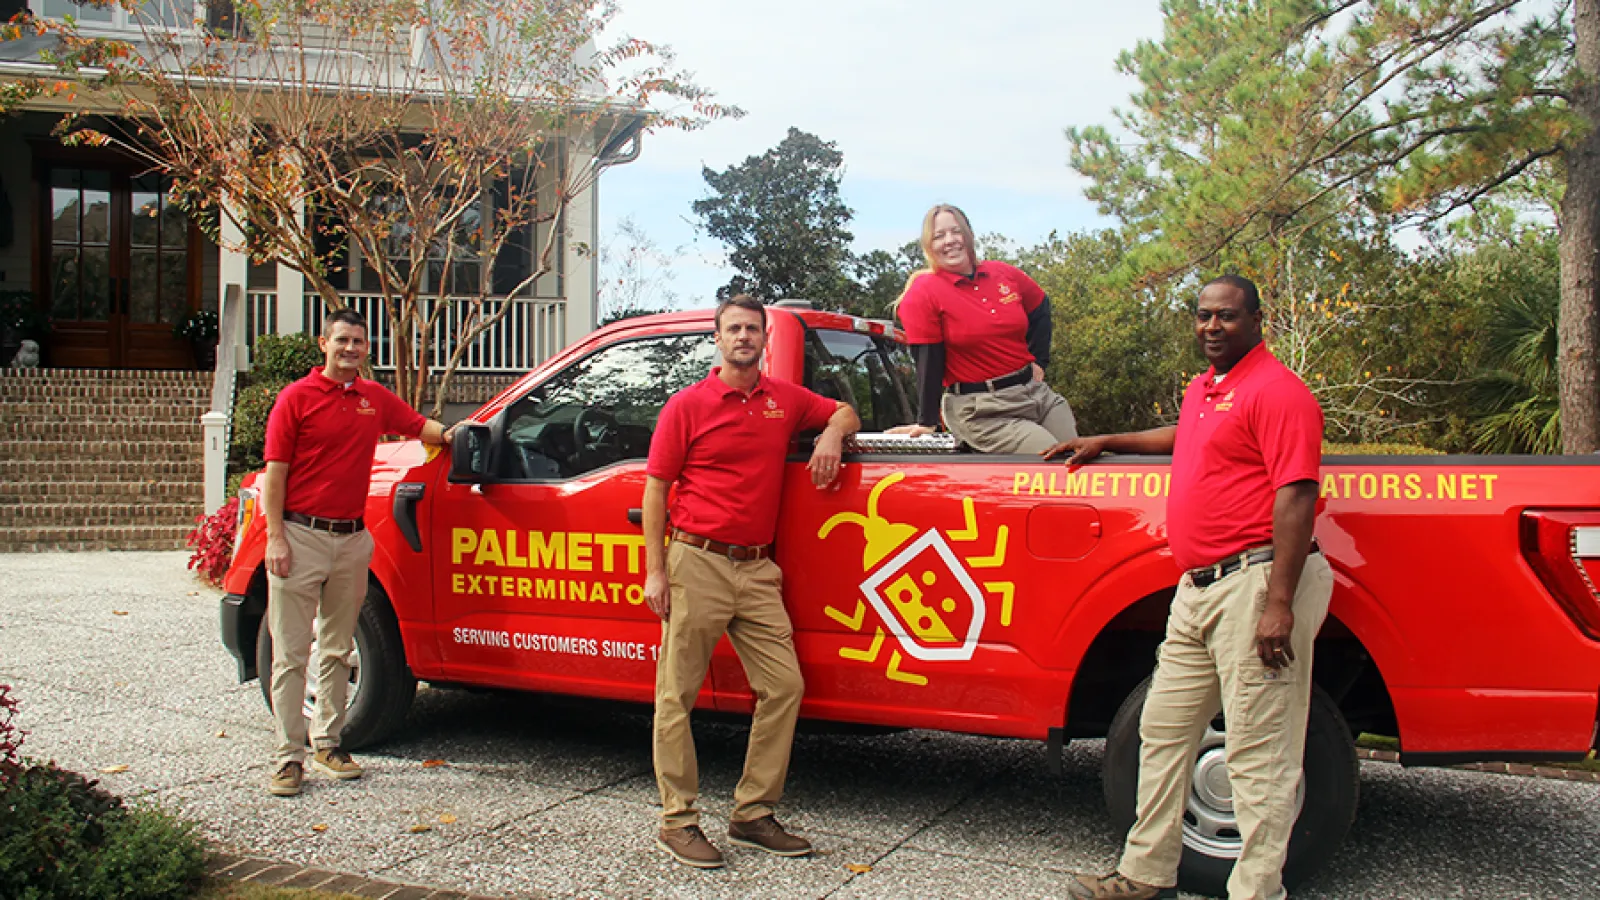 a group of people standing next to a red truck